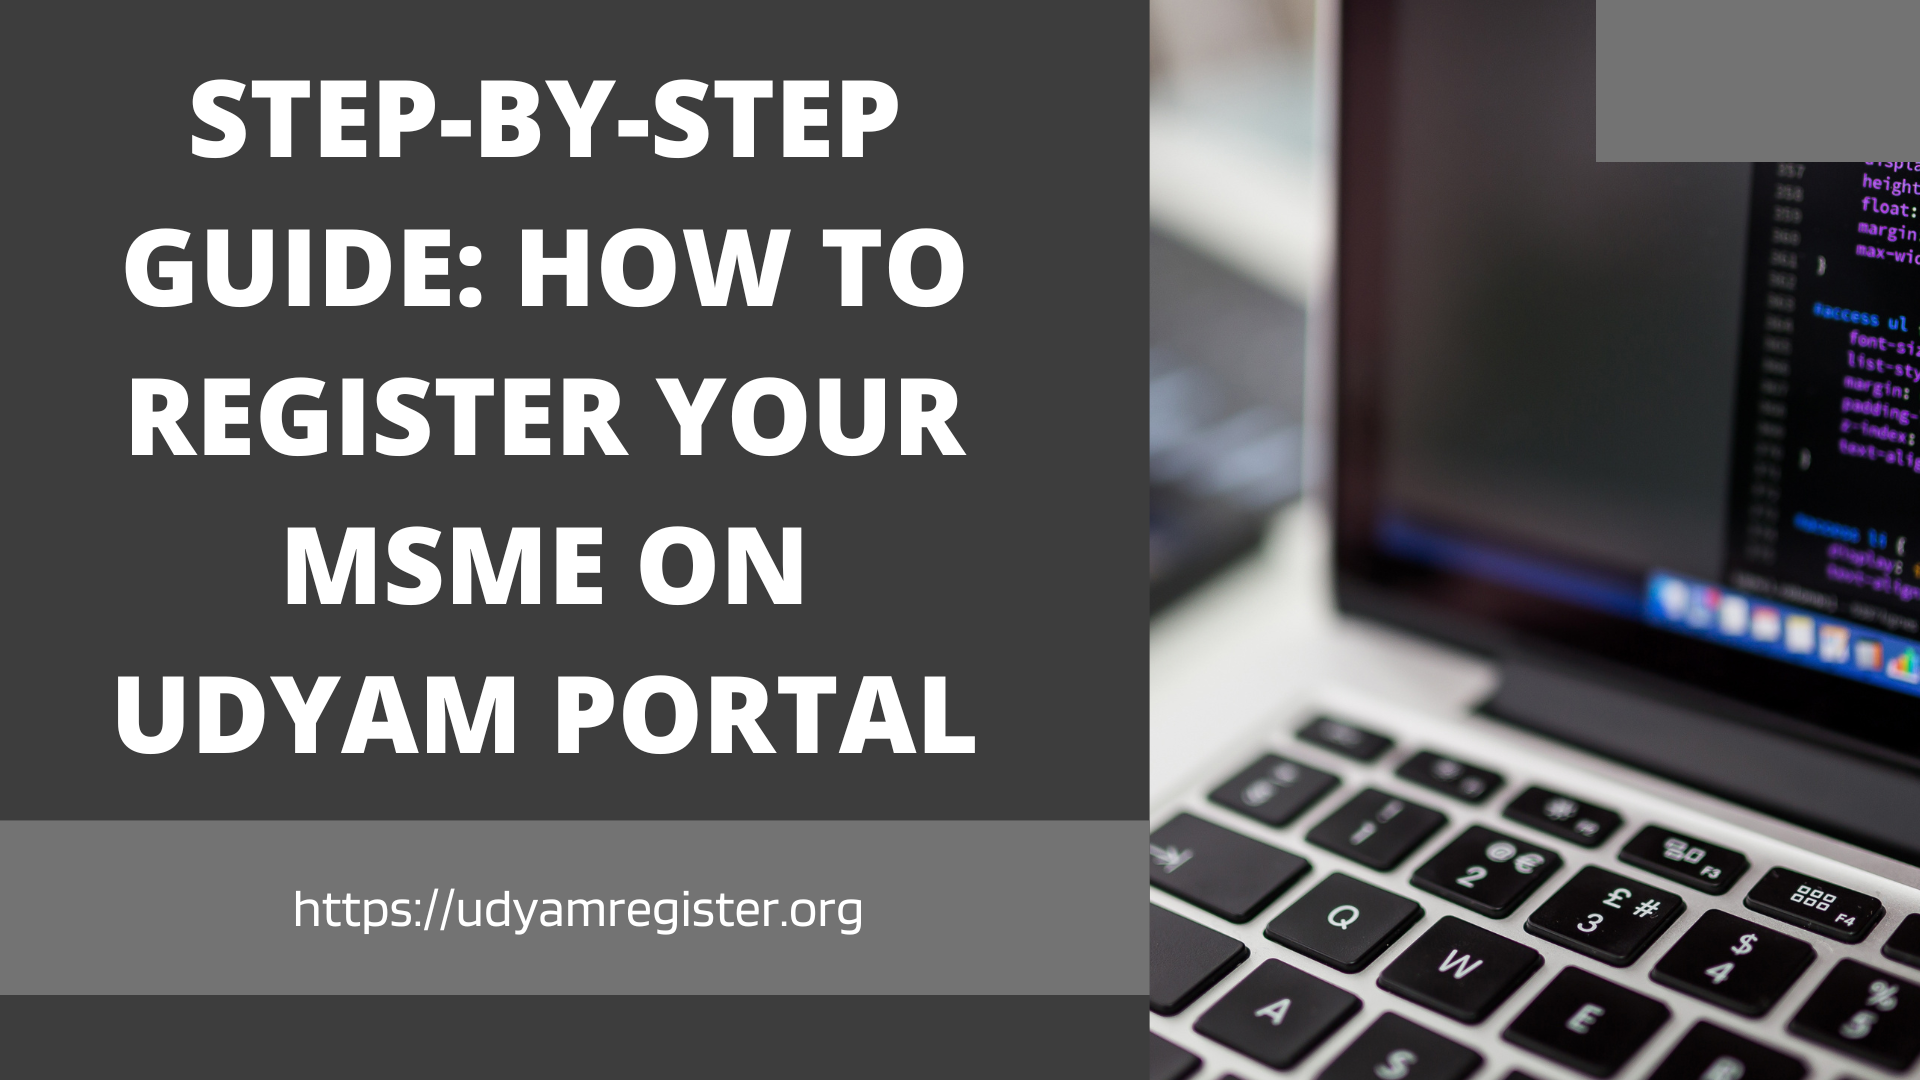 Step-by-Step Guide: How to Register Your MSME on Udyam Portal